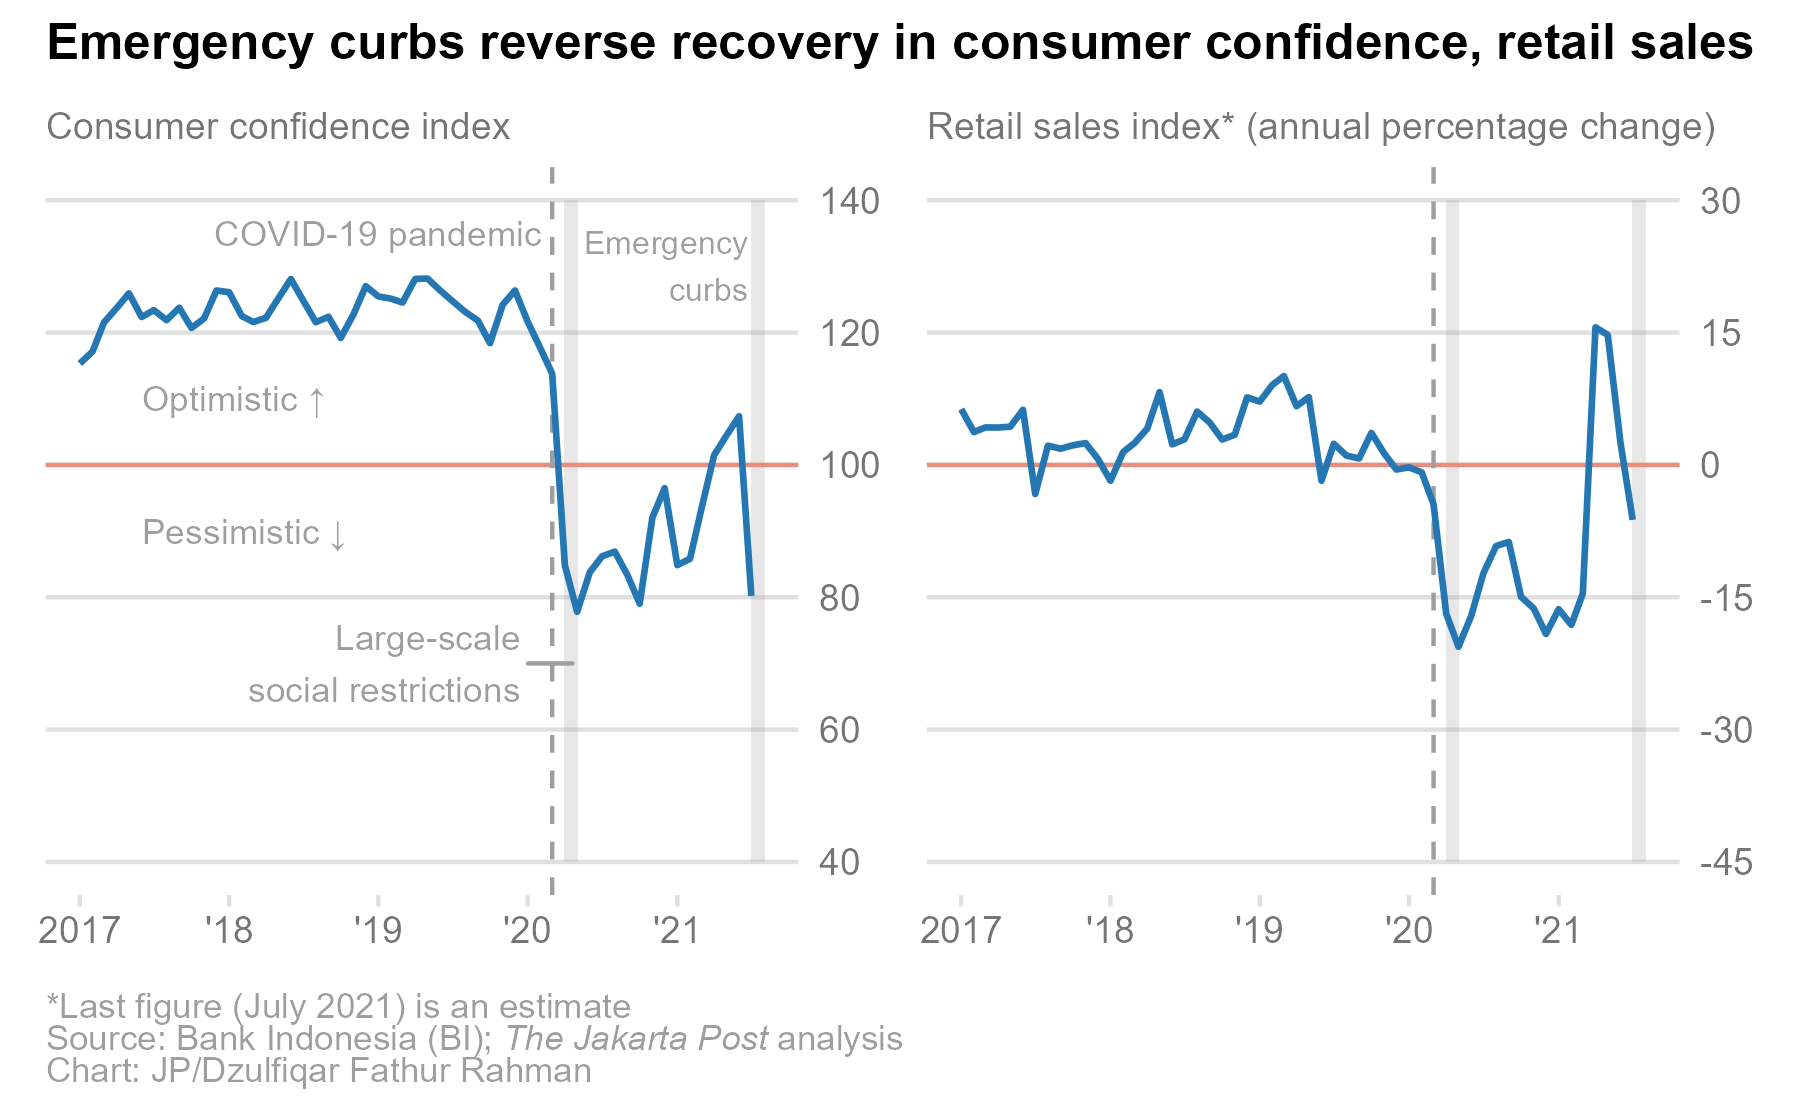 A chart showing how the COVID-19 emergency curbs reversed the three-month long recovery trend in the Consumer Confidence Index and Retail Sales Index